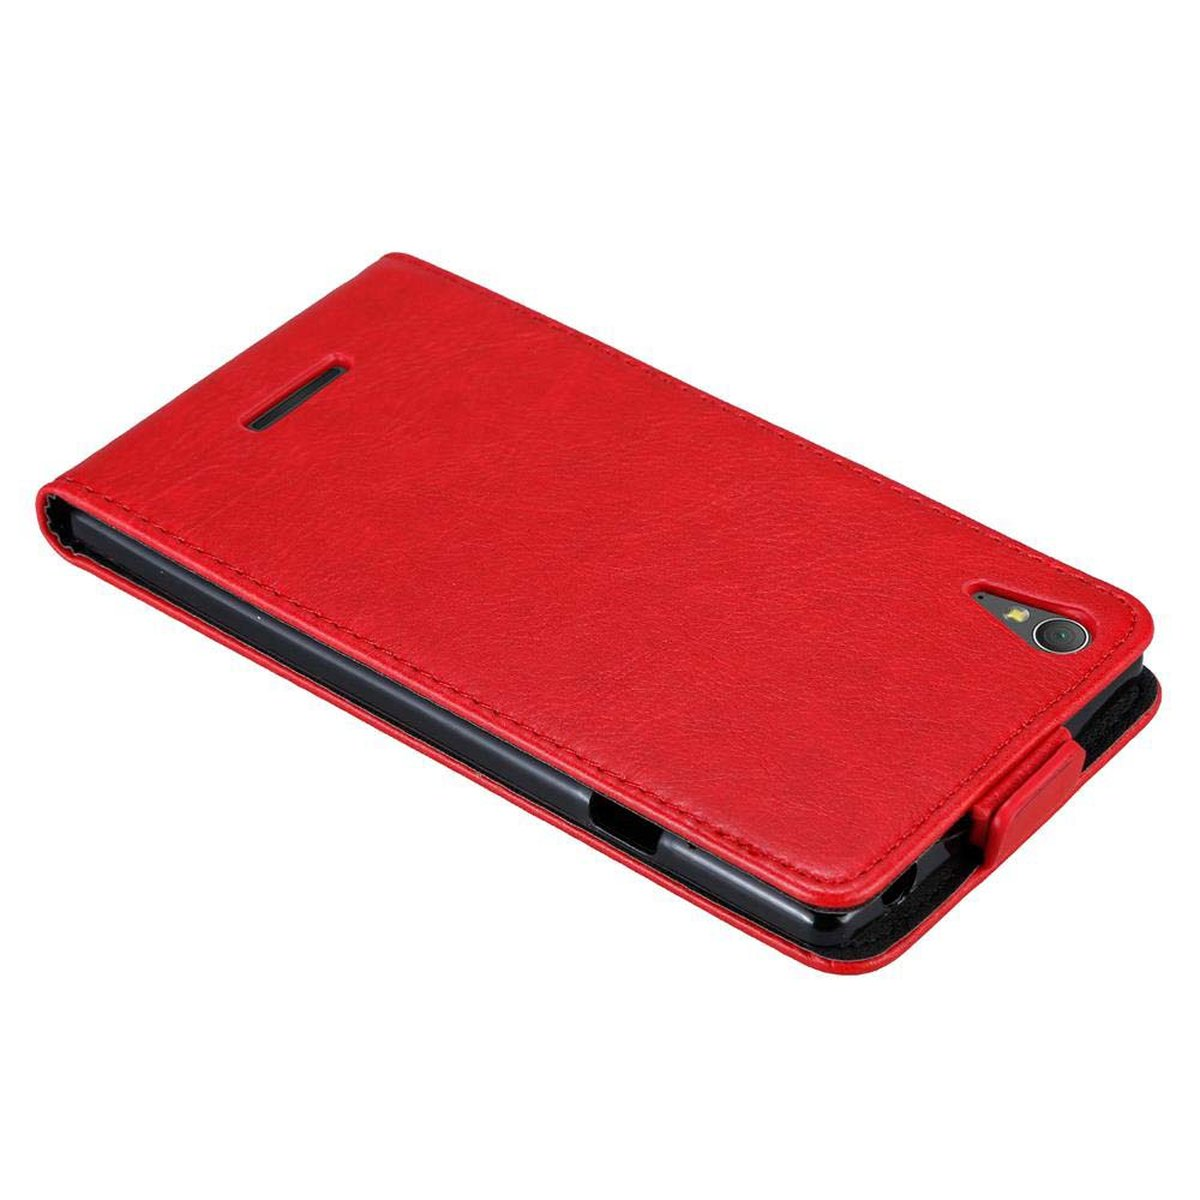 Hülle Cover, Flip Flip APFEL ROT CADORABO T3, Style, Sony, Xperia im